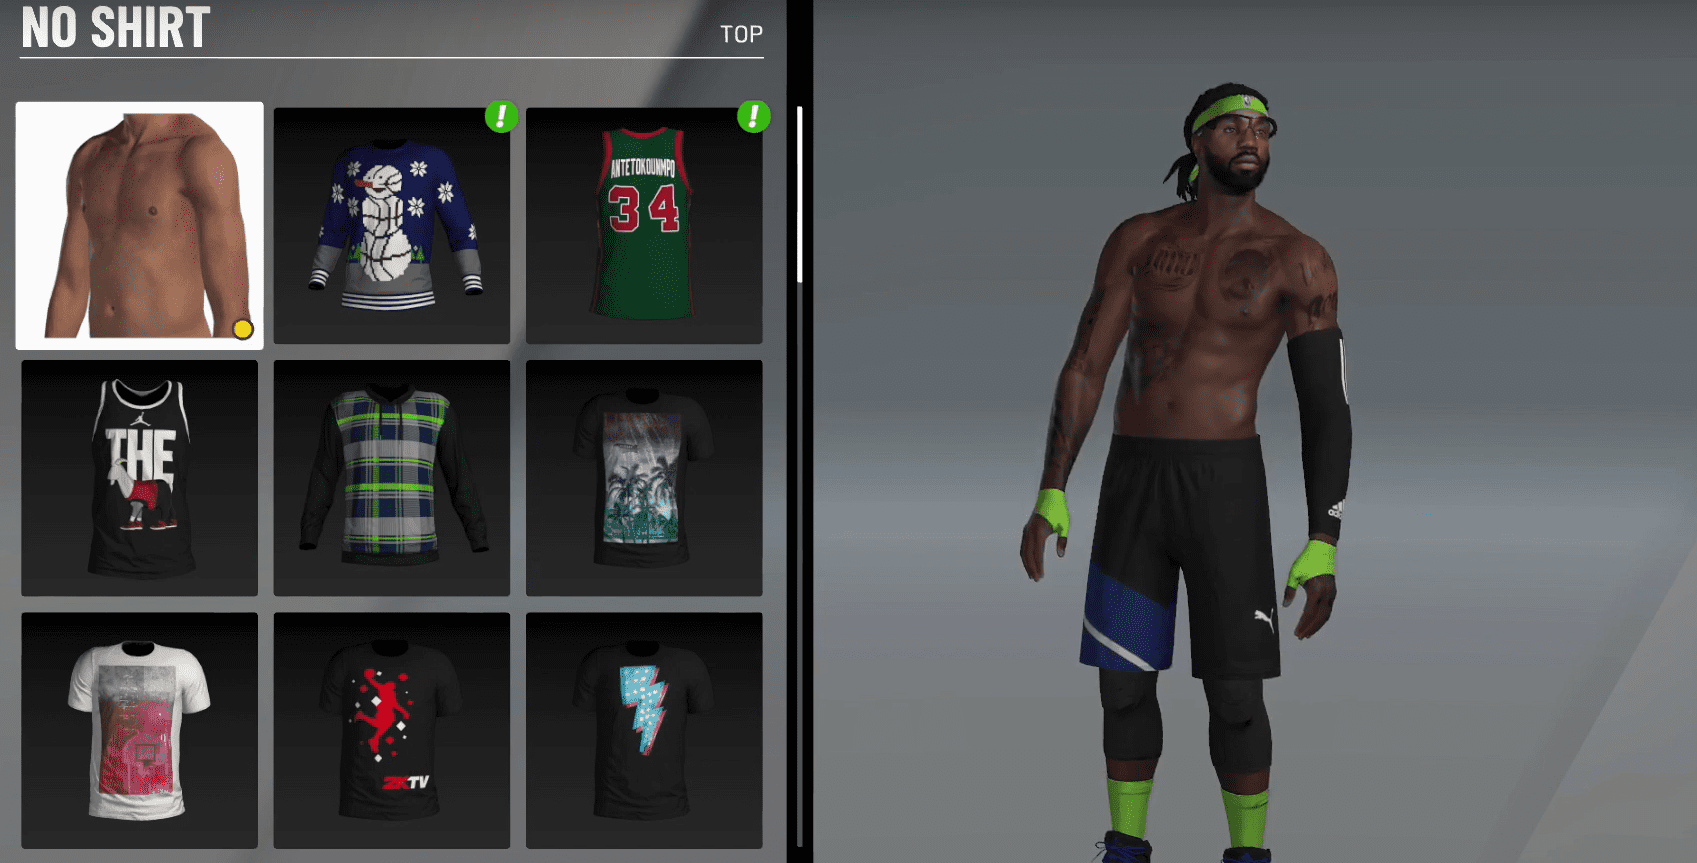 NBA 2K20 How to Take of Your Shirt